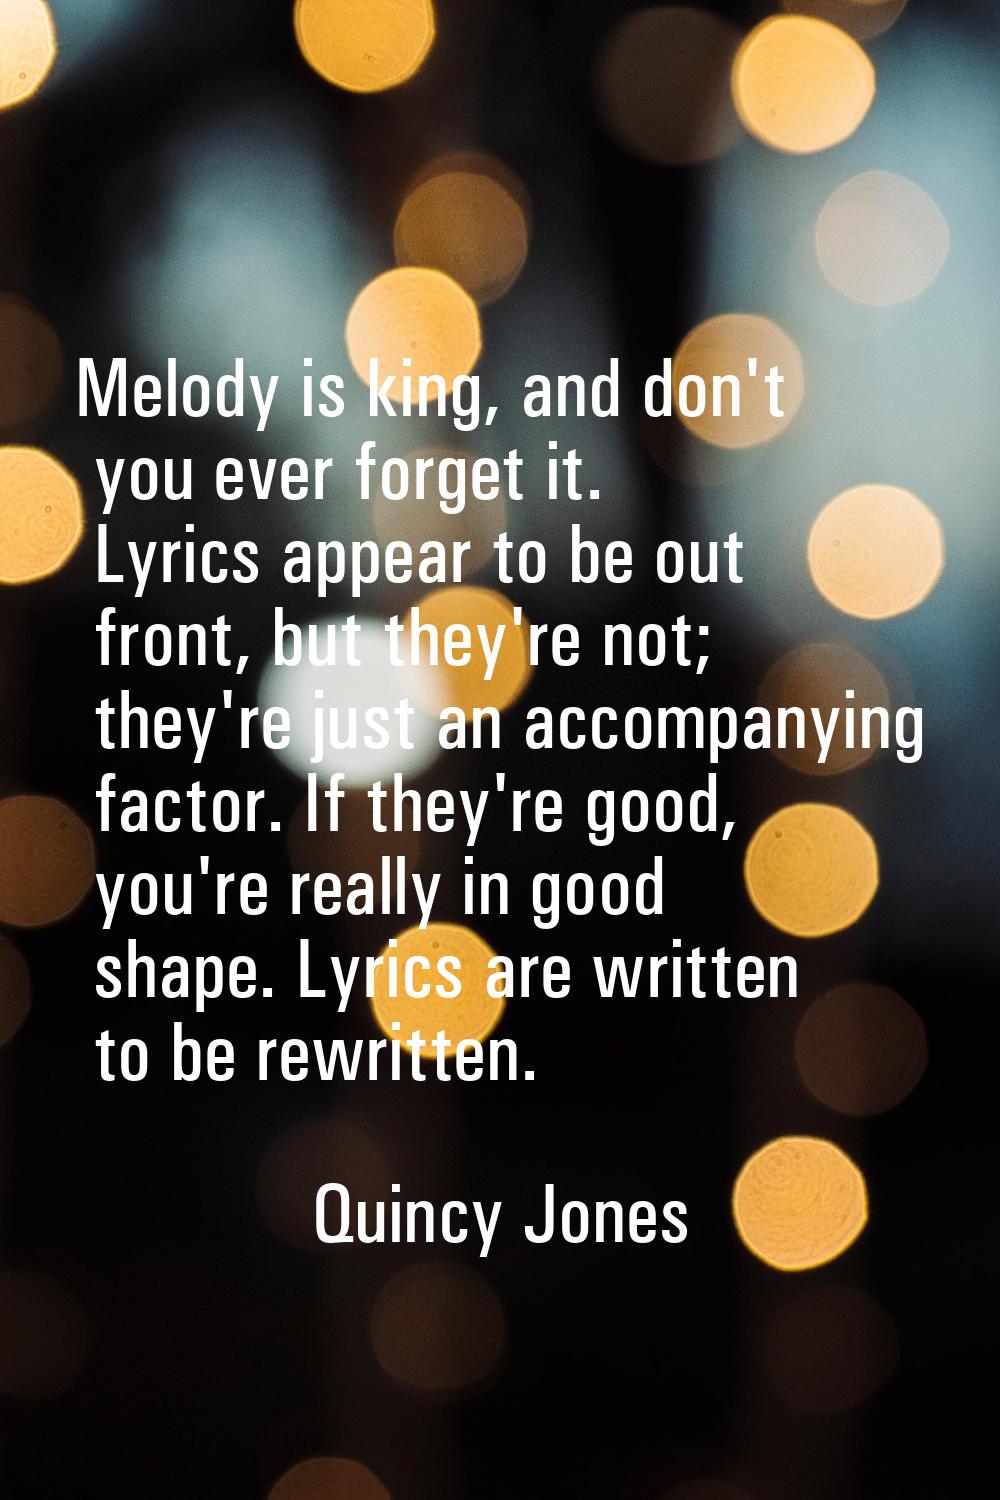 Melody is king, and don't you ever forget it. Lyrics appear to be out front, but they're not; they'